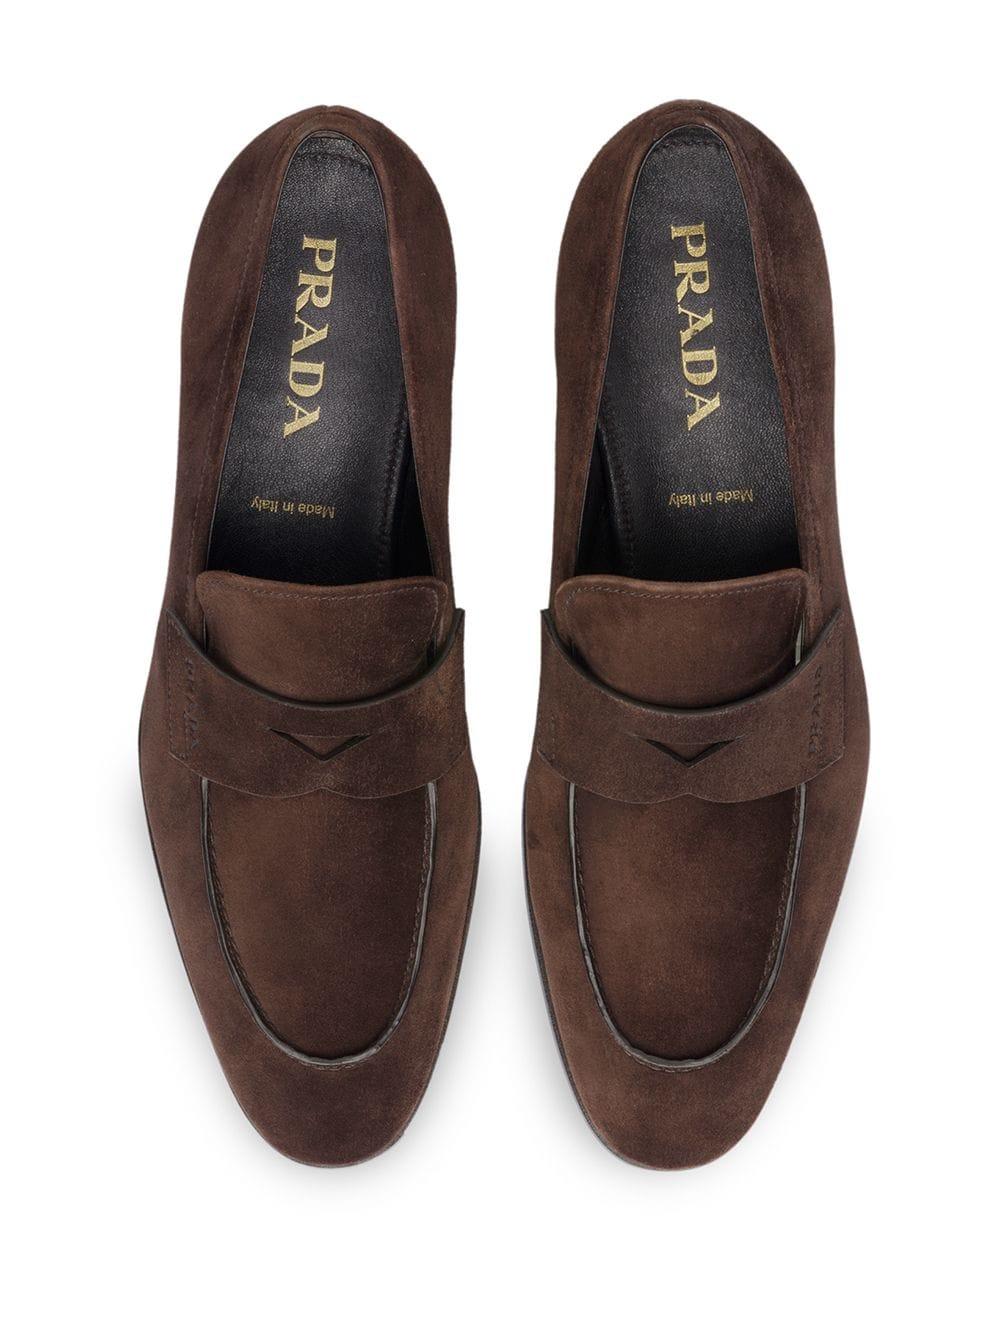 Prada Suede Penny Loafers in Brown for Men | Lyst